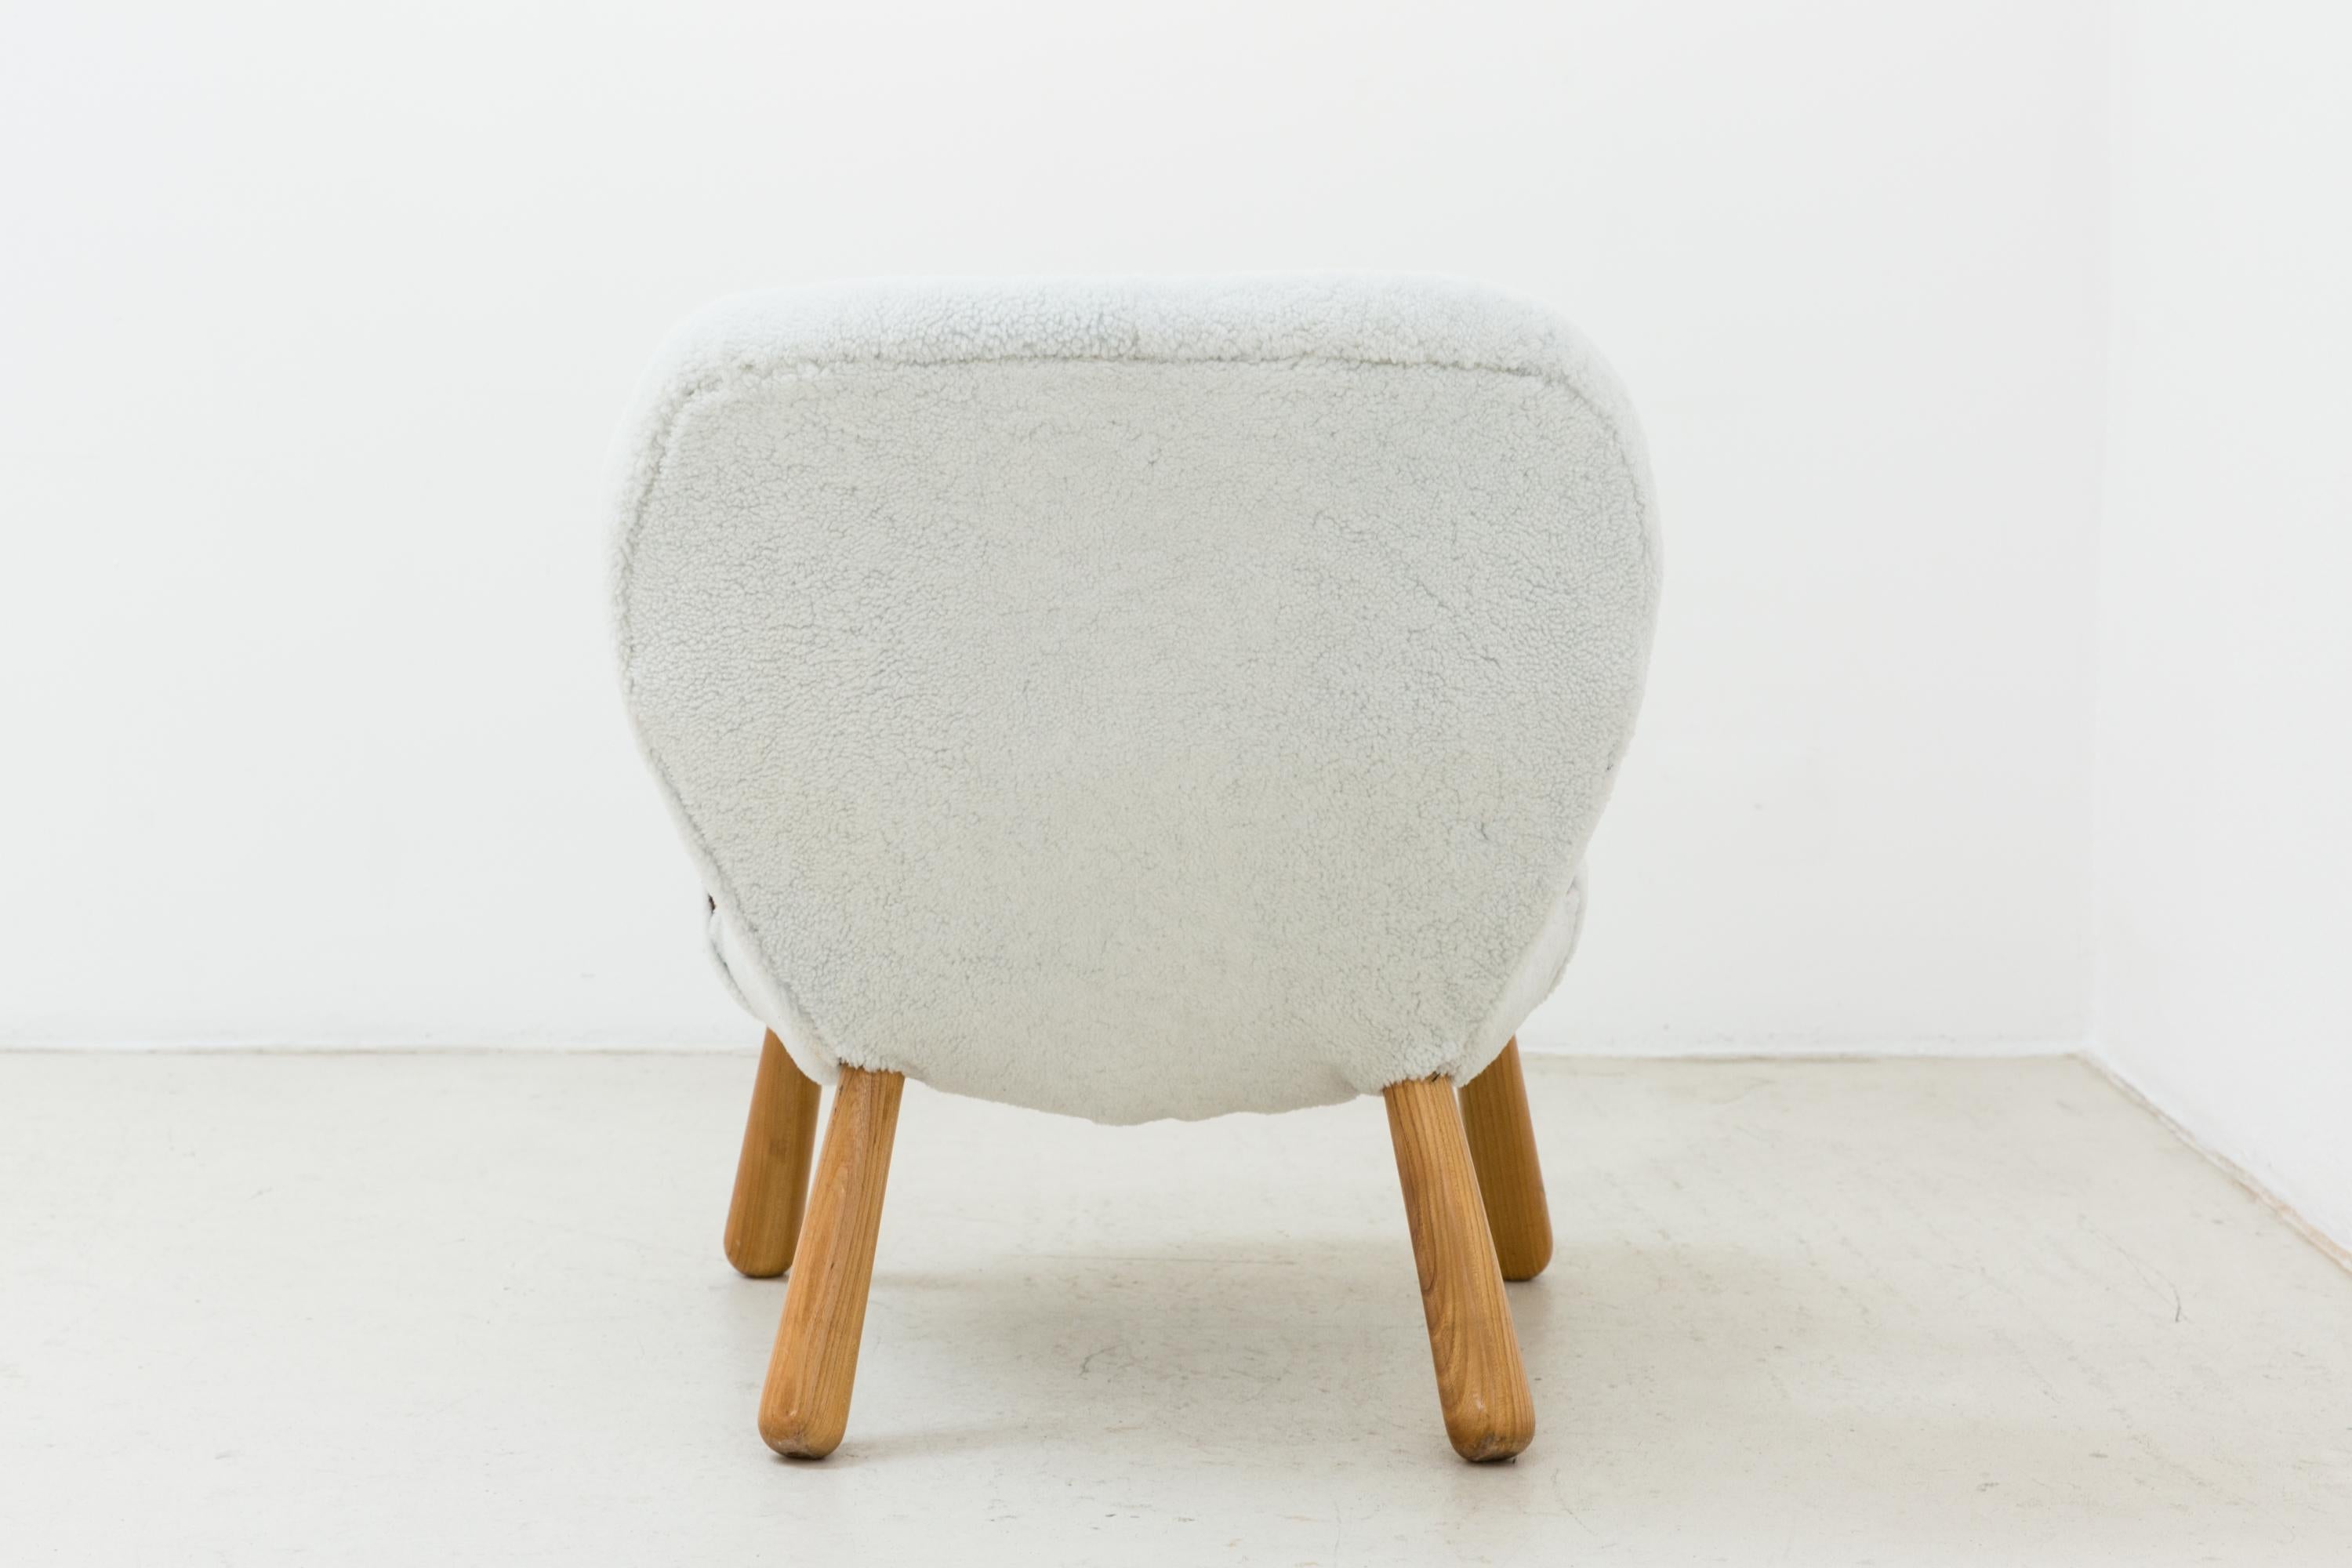 Lambskin Clam Chair, 1940s by Philip Arctander